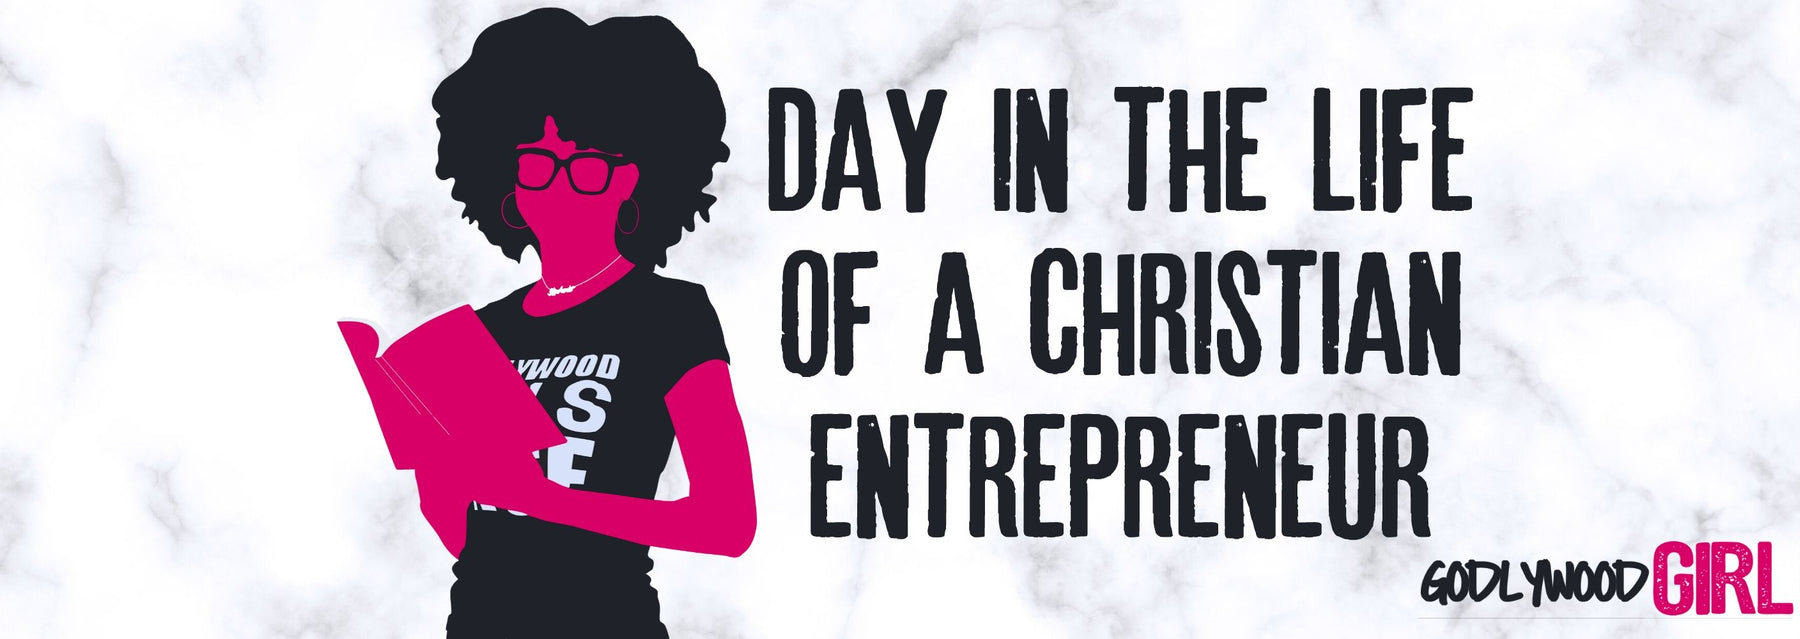 Day In The Life Of A Christian Entrepreneur Ep.19 | 7 DAYS IN THE LIFE OF AN ENTREPRENEUR + A PRODUCT LAUNCH!